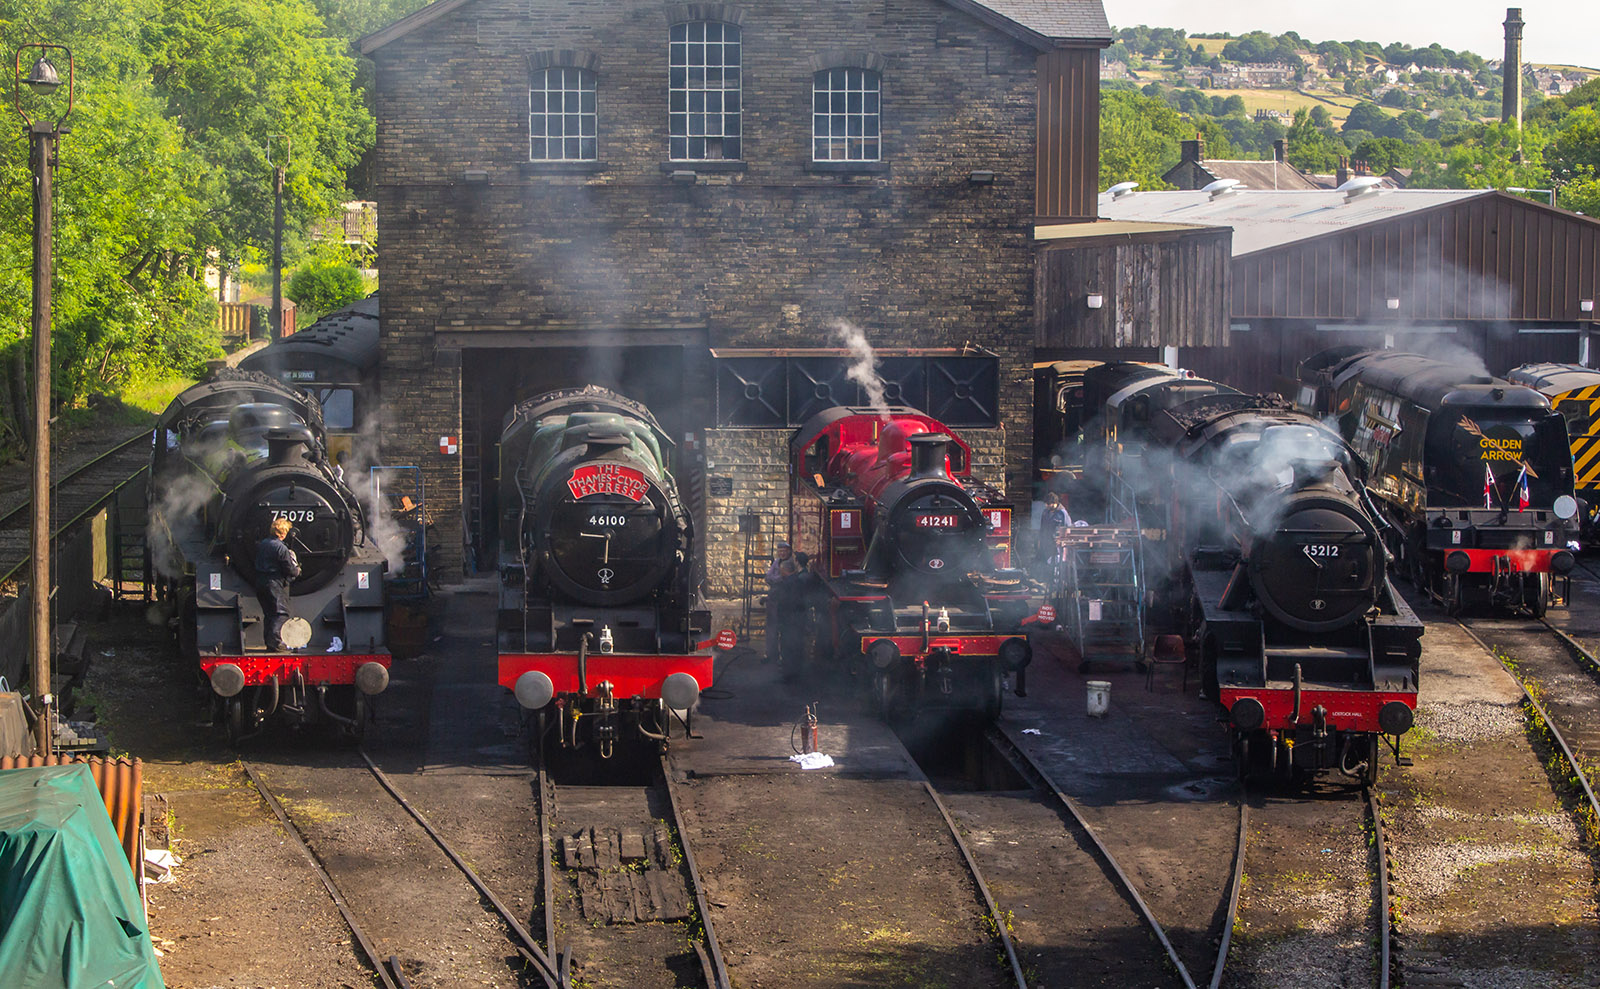 Riding the Rails from Keighley to Haworth on a Vintage Steam Train